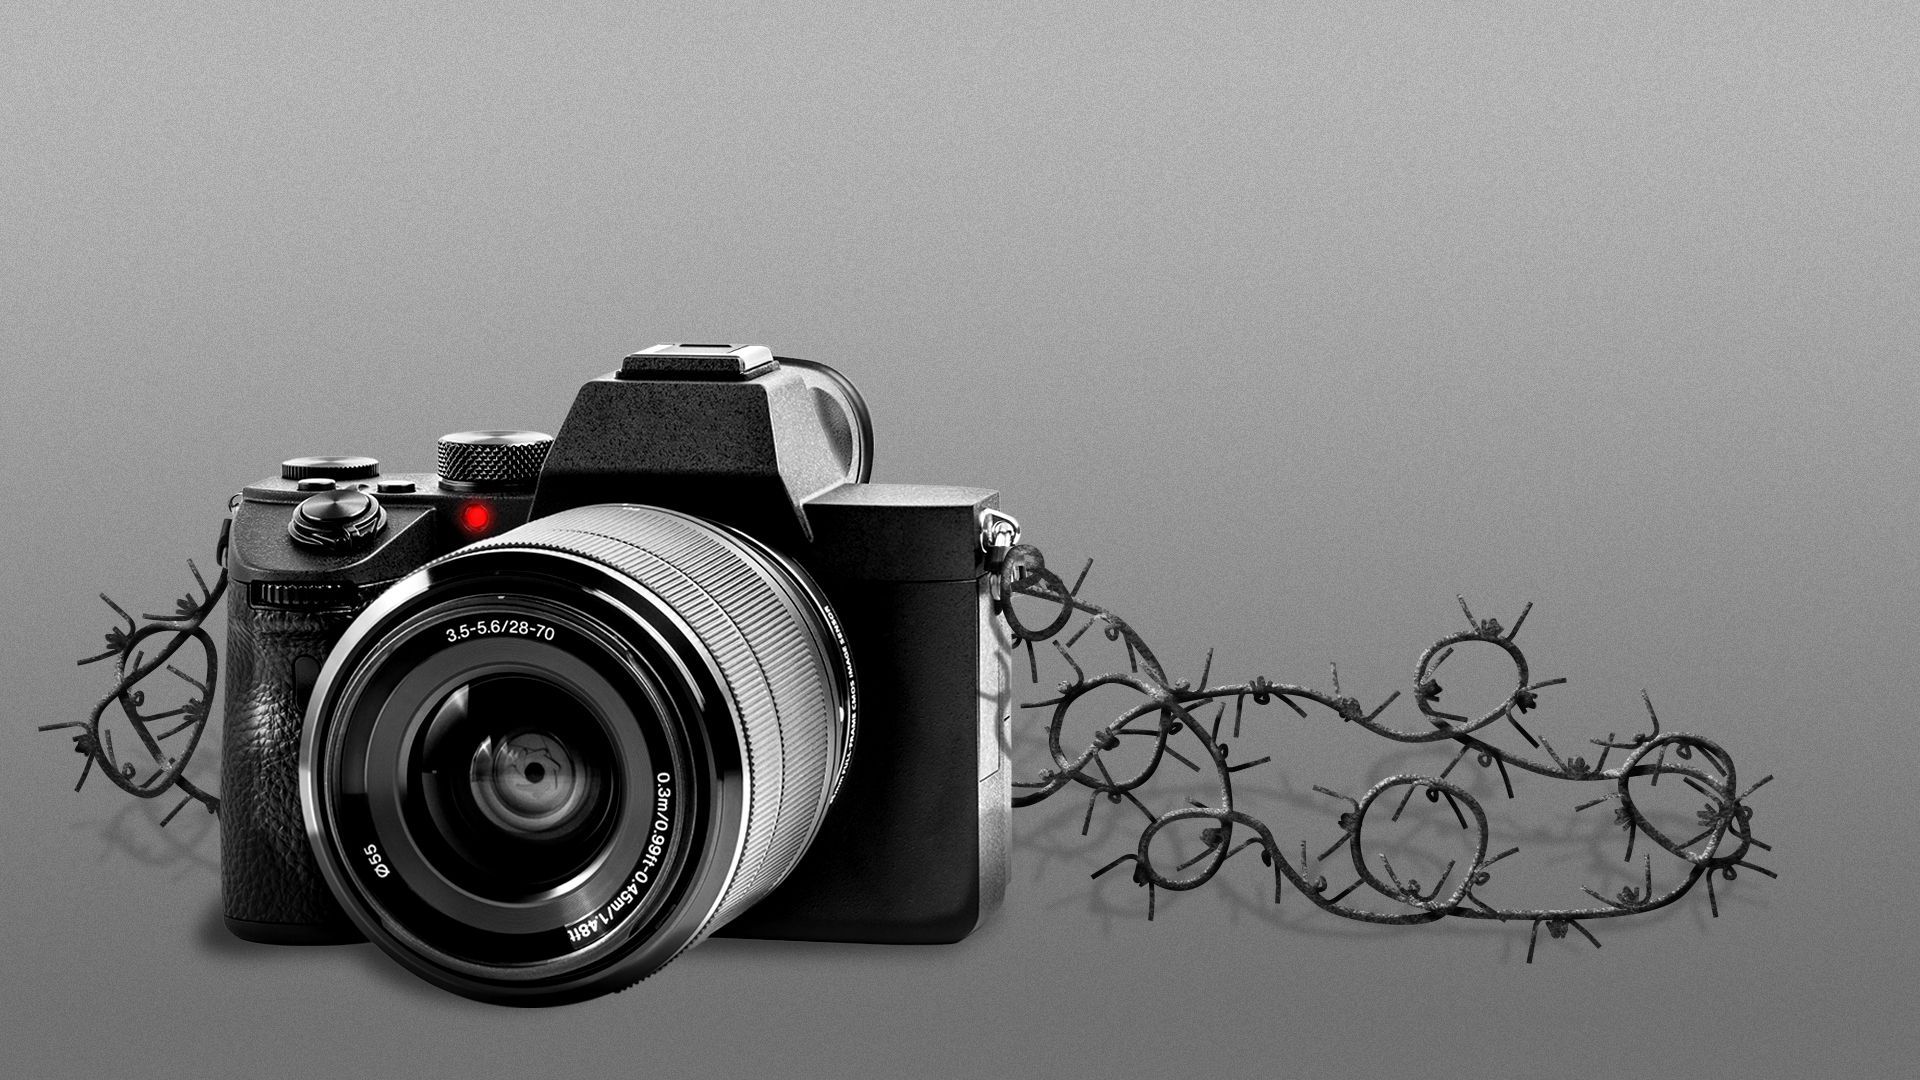 Illustration of a camera with a strap made out of barbed wire